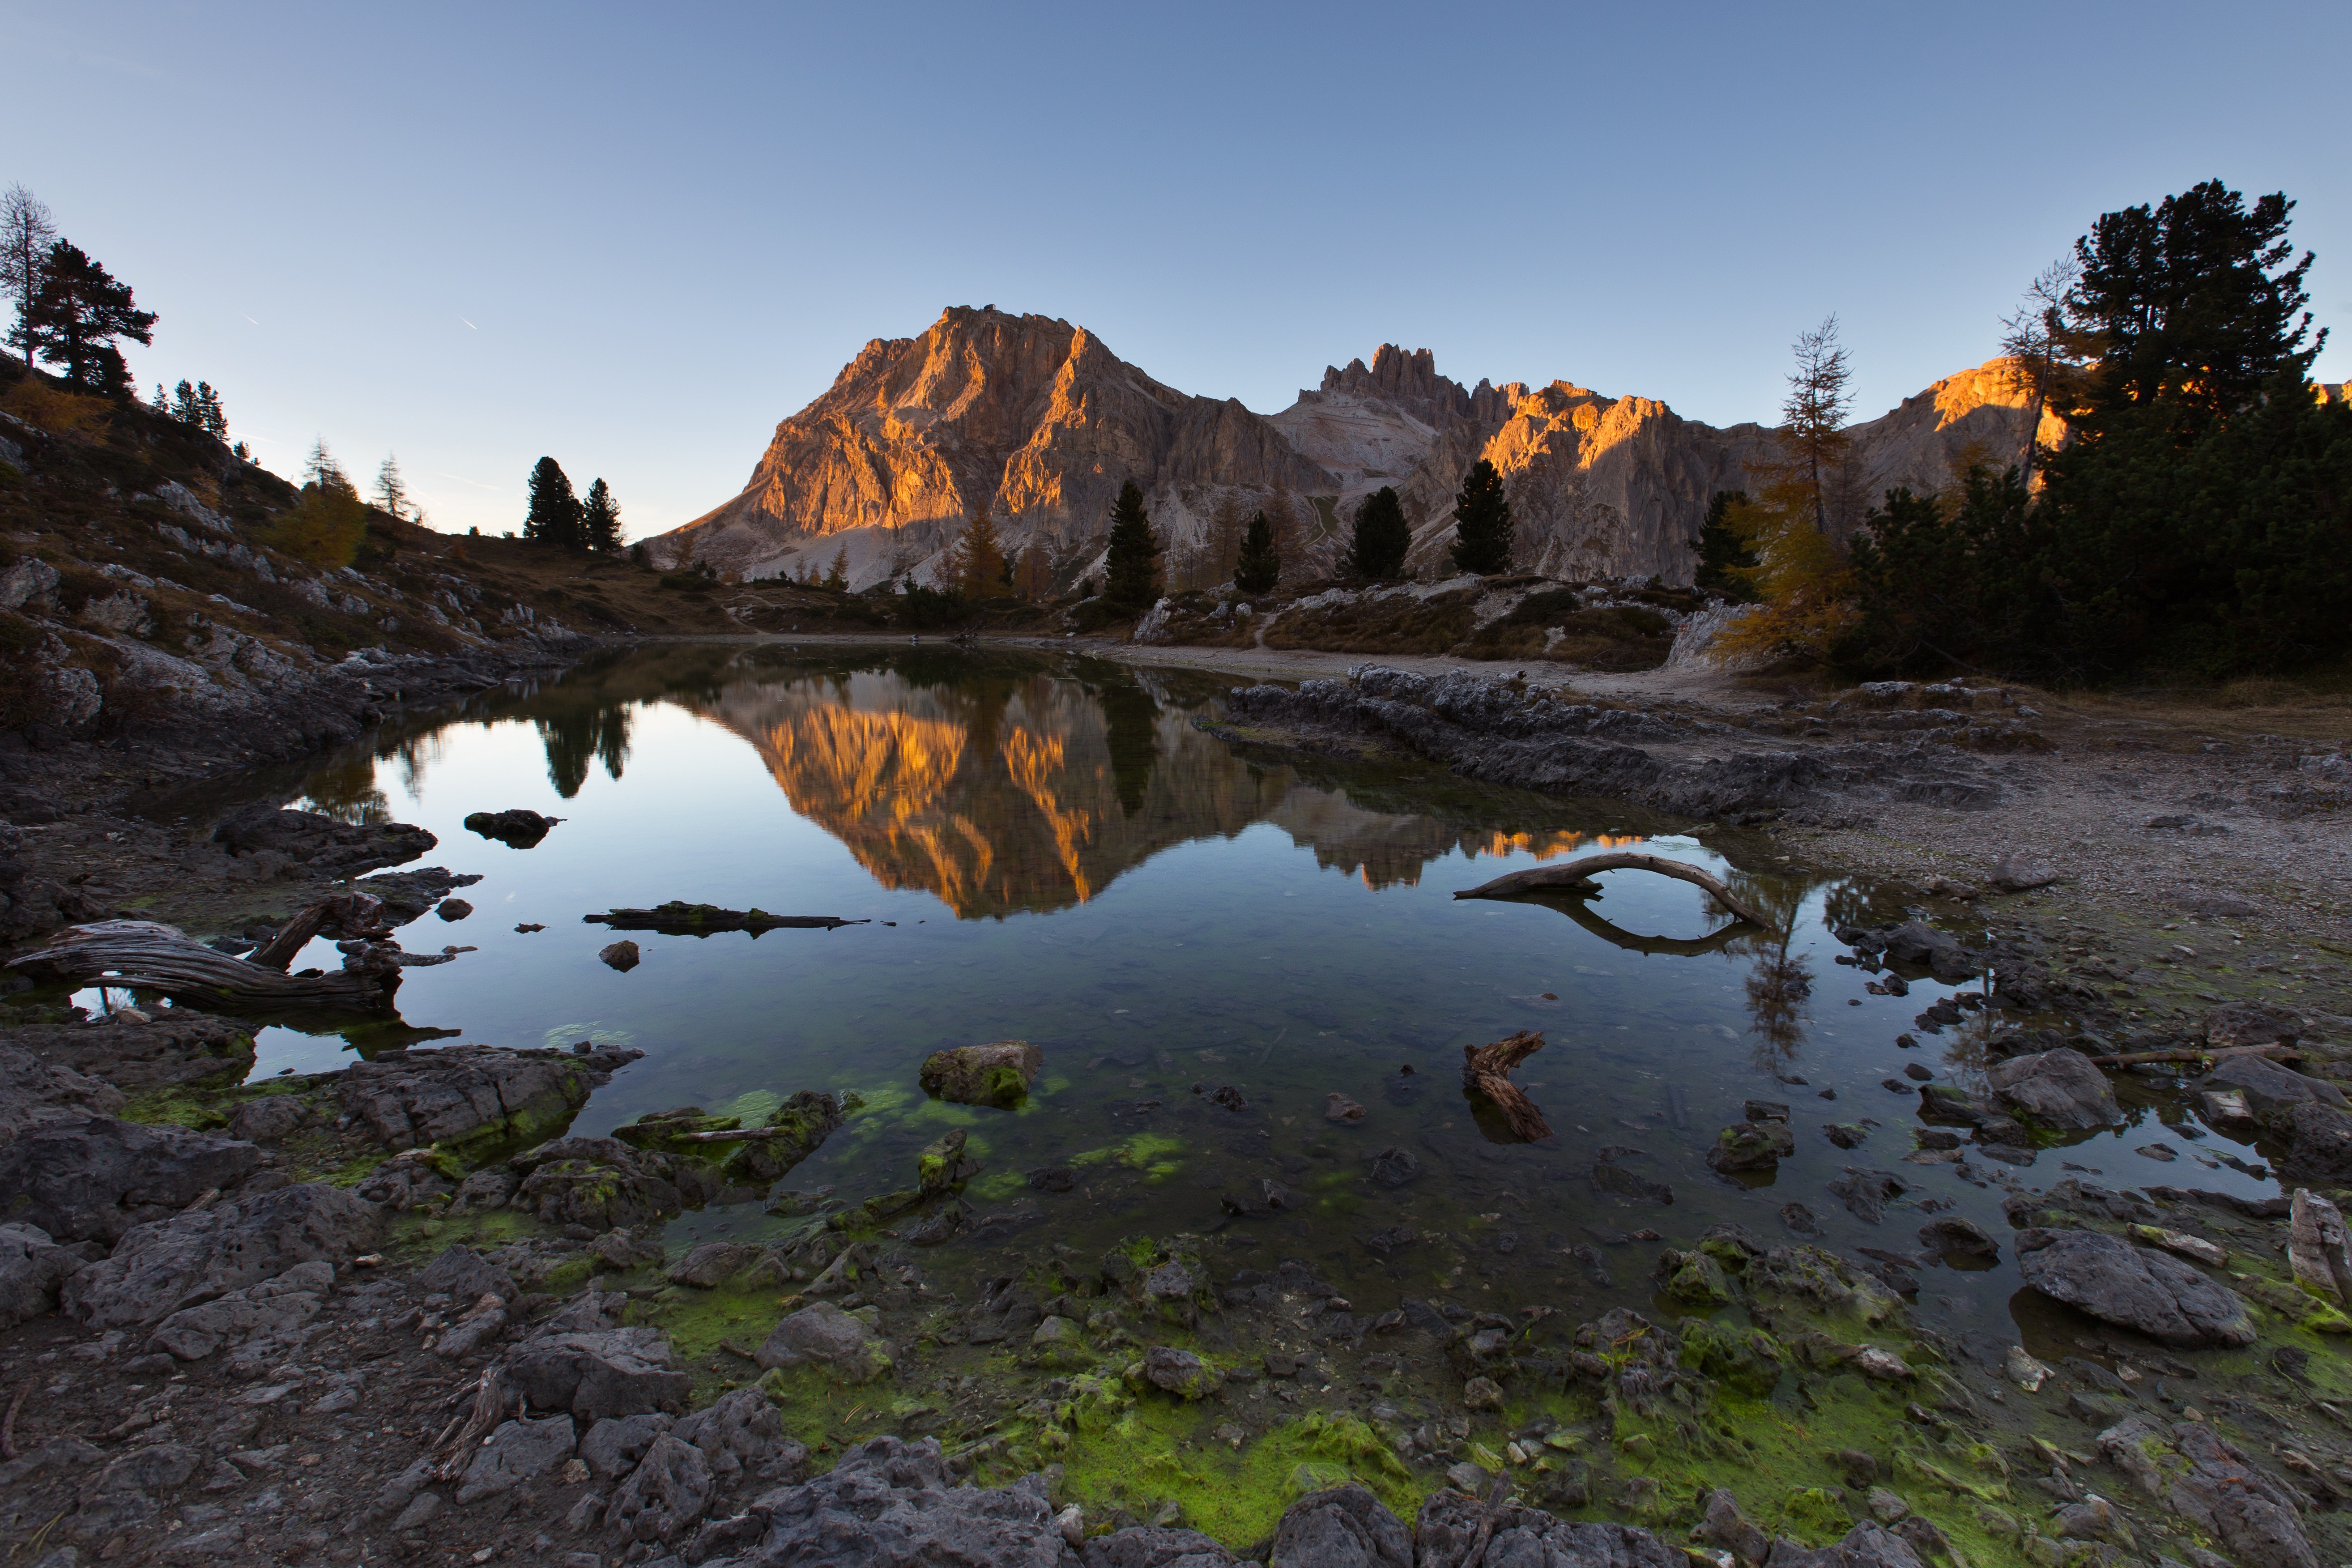 Reflection in the water of a mountain range